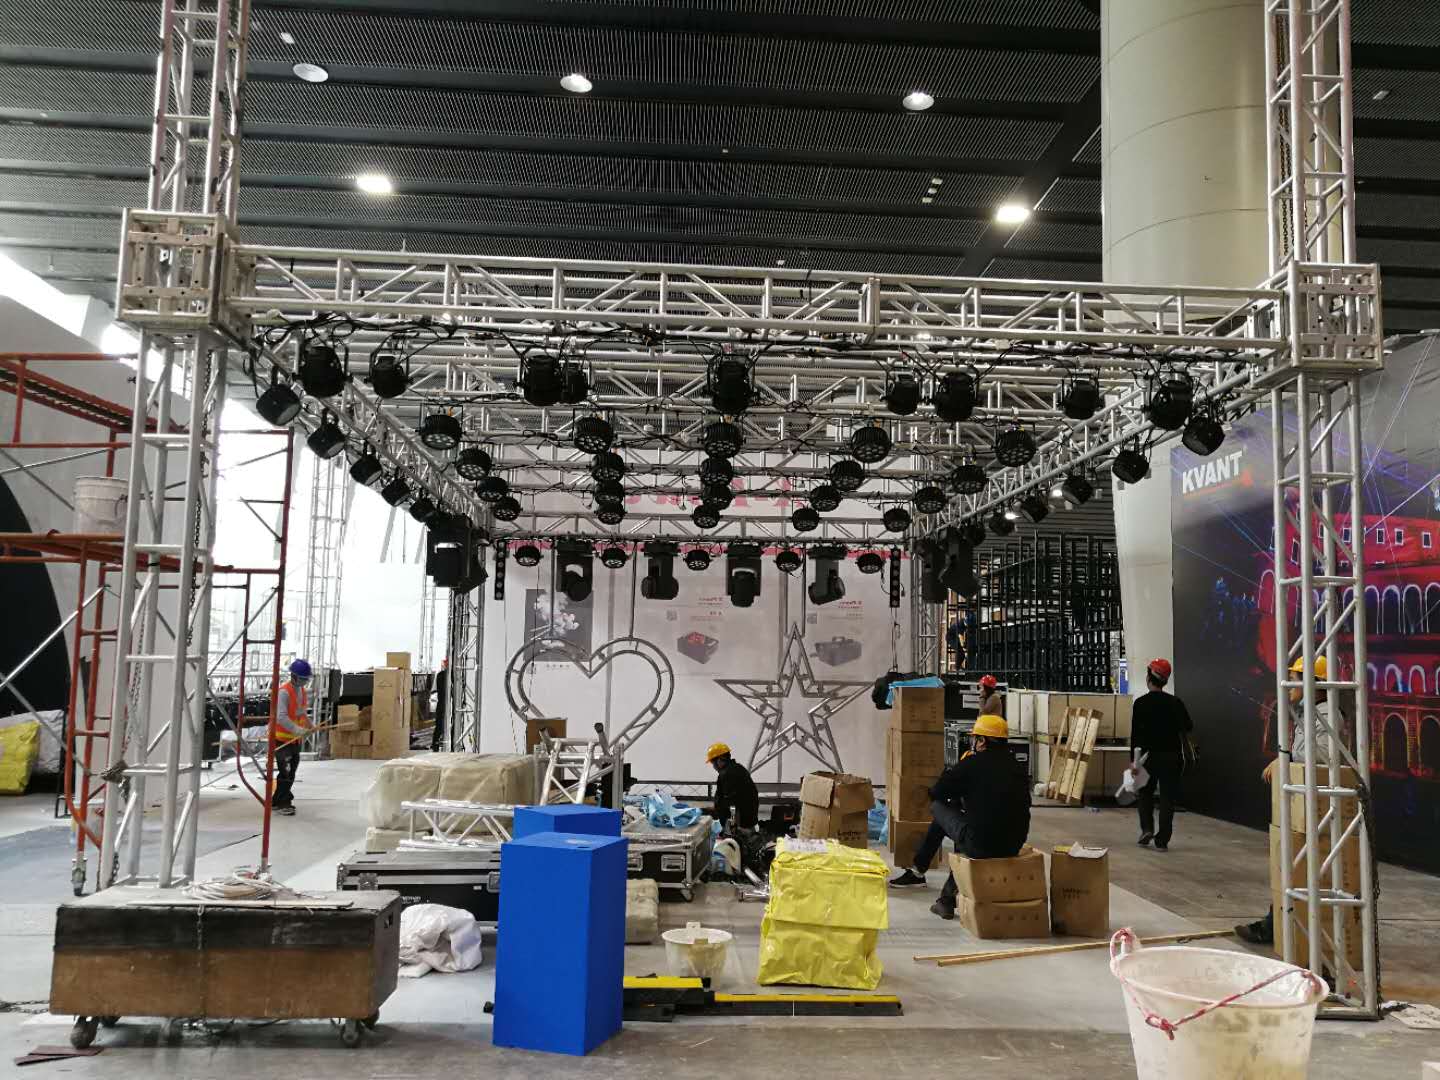 Building the booth of 2019 Guangzhou International Prolight+Sound Exhibition